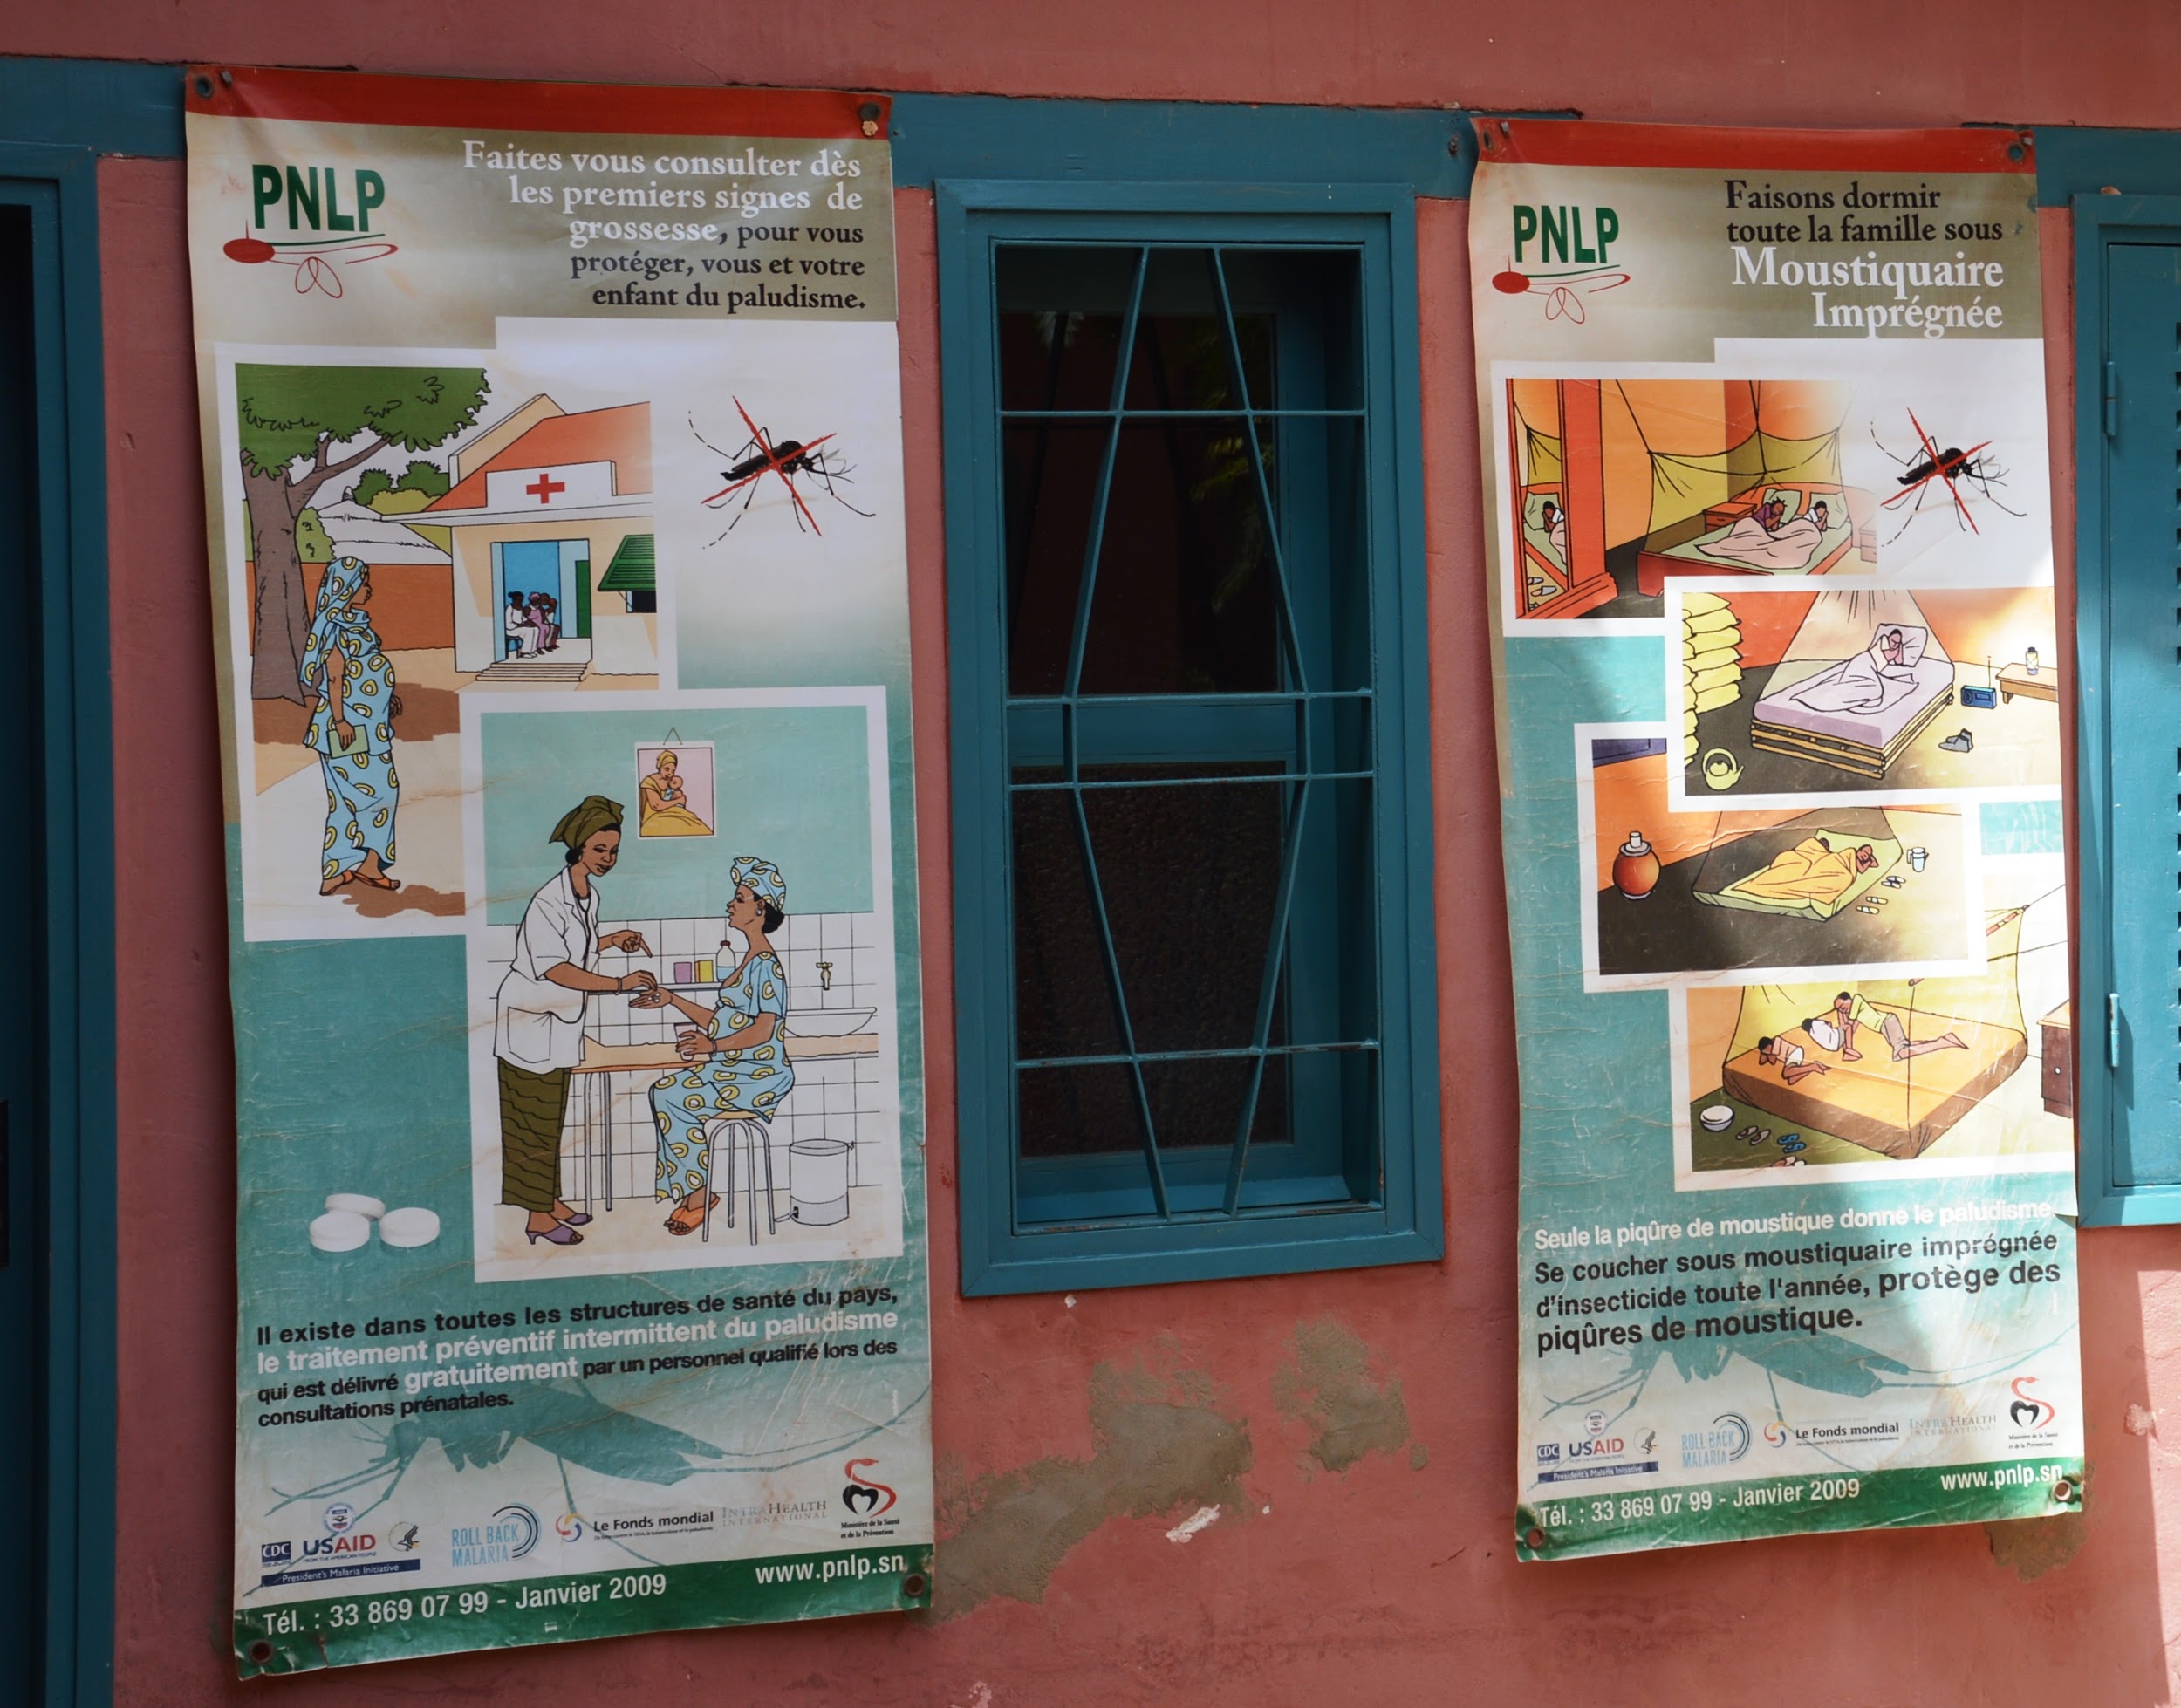 Educational posters on malaria.